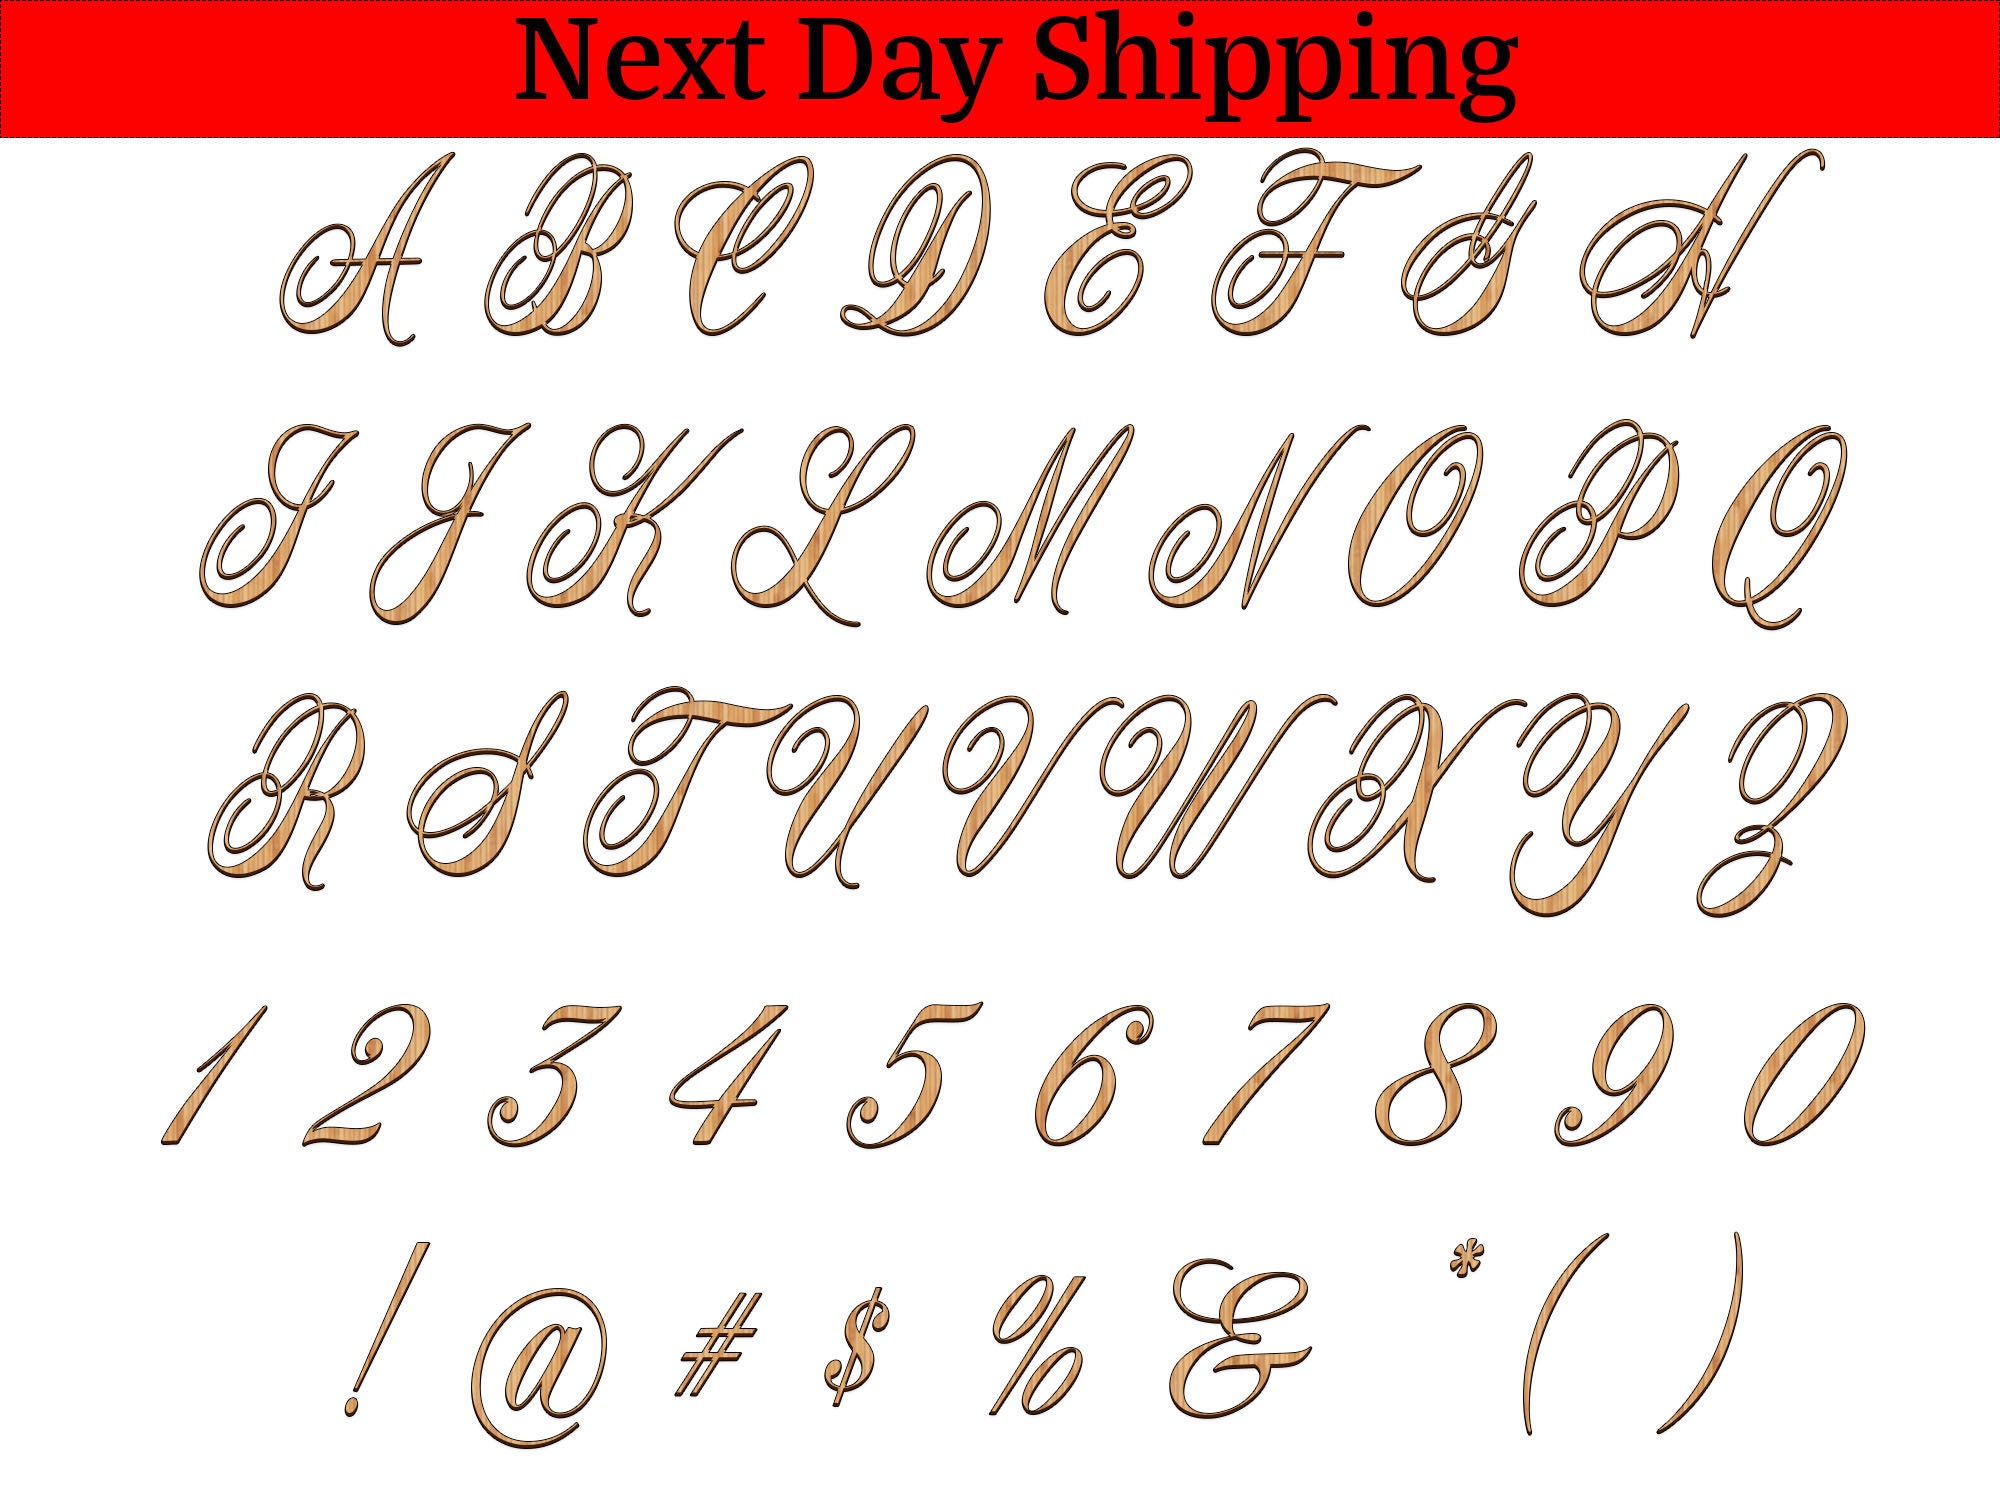 50 Mix Medium Wooden Letter Shapes 3mm-6mm Thick 8-15cm Size 1/8 Inch  Thickness 1-6 Inch Size 